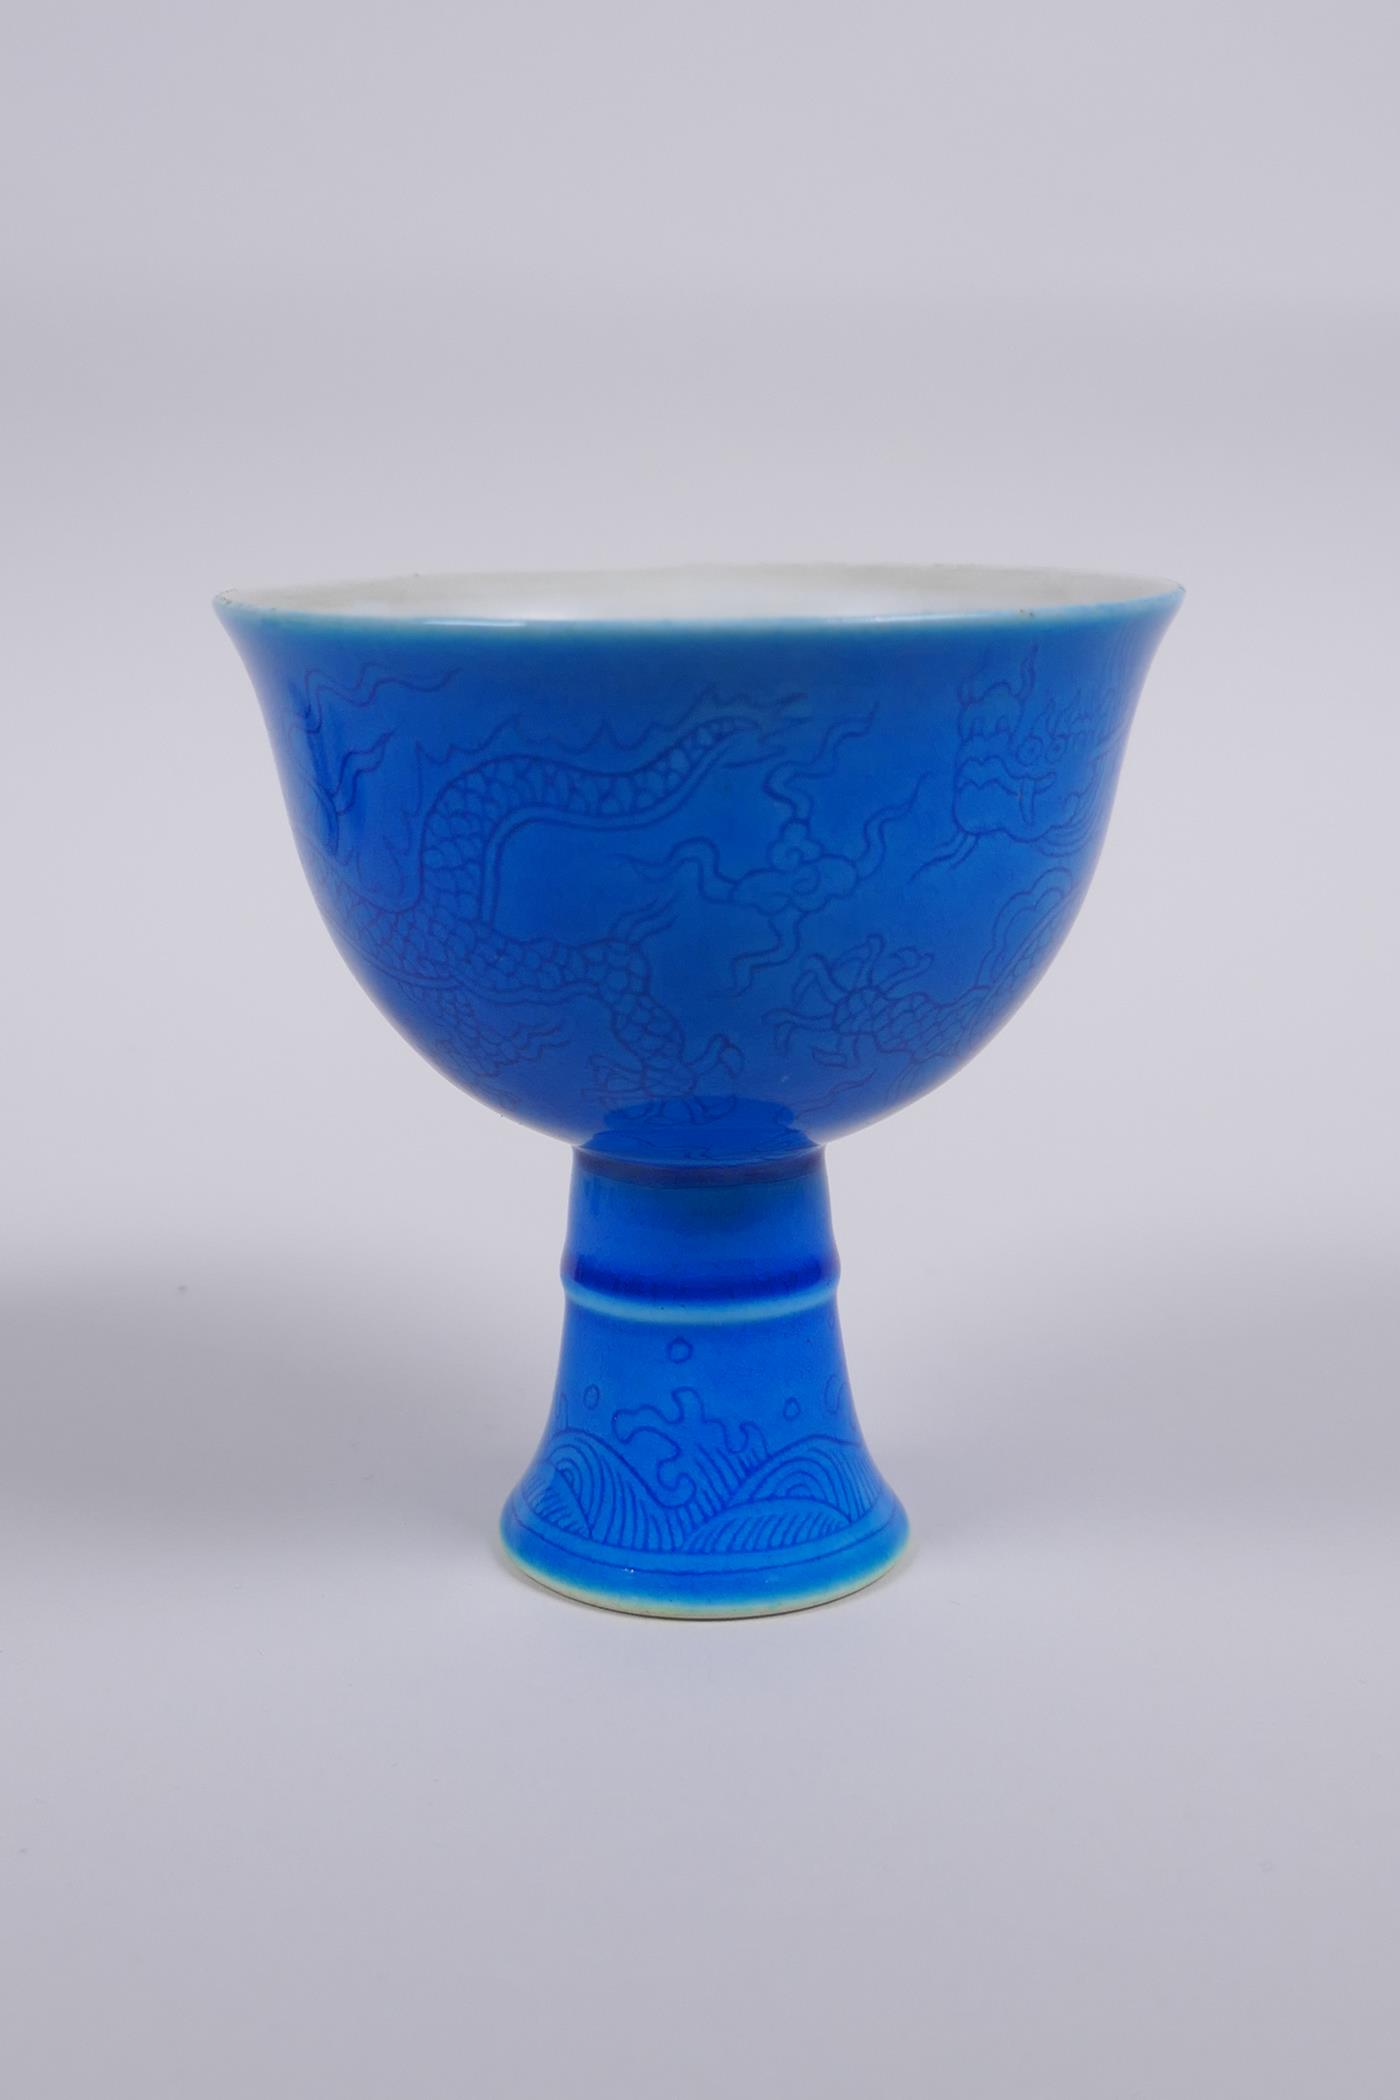 A blue glazed porcelain stem cup with incised dragon decoration, Chinese Chenghua 6 character mark - Image 2 of 4